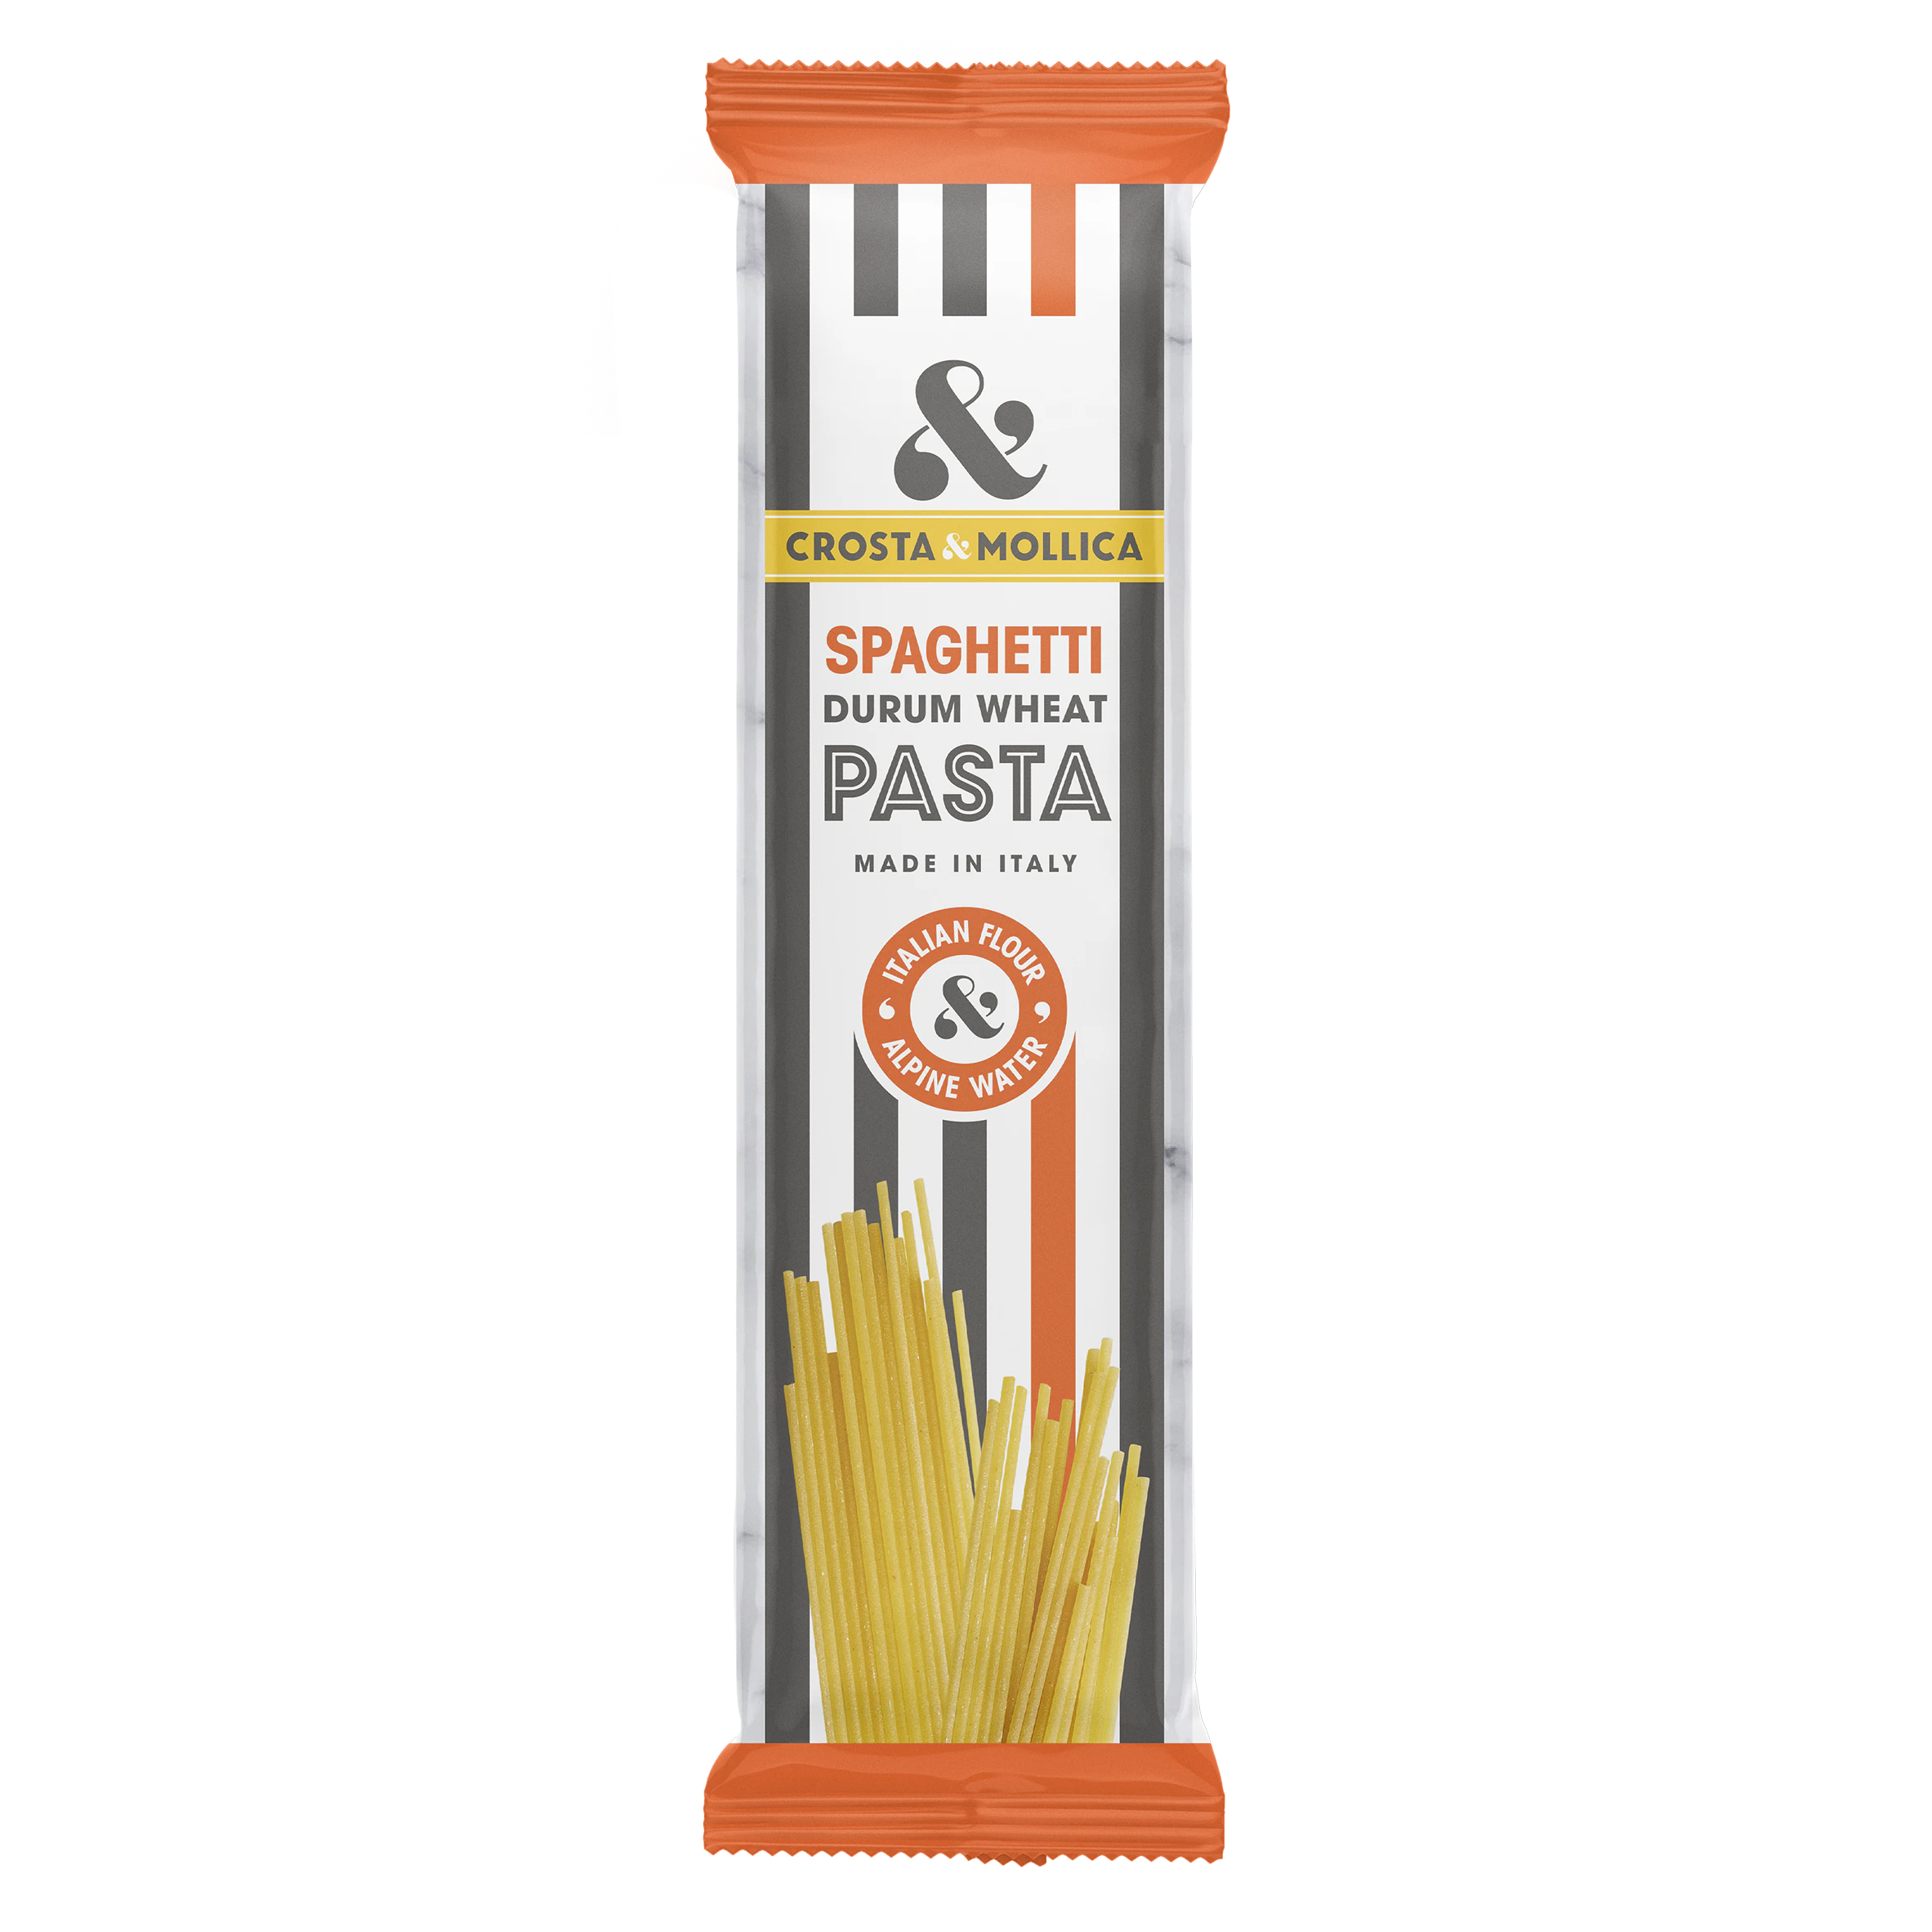 A rectangular paper bag of spaghetti with orange and black vertical stripes running down the front of the bag.